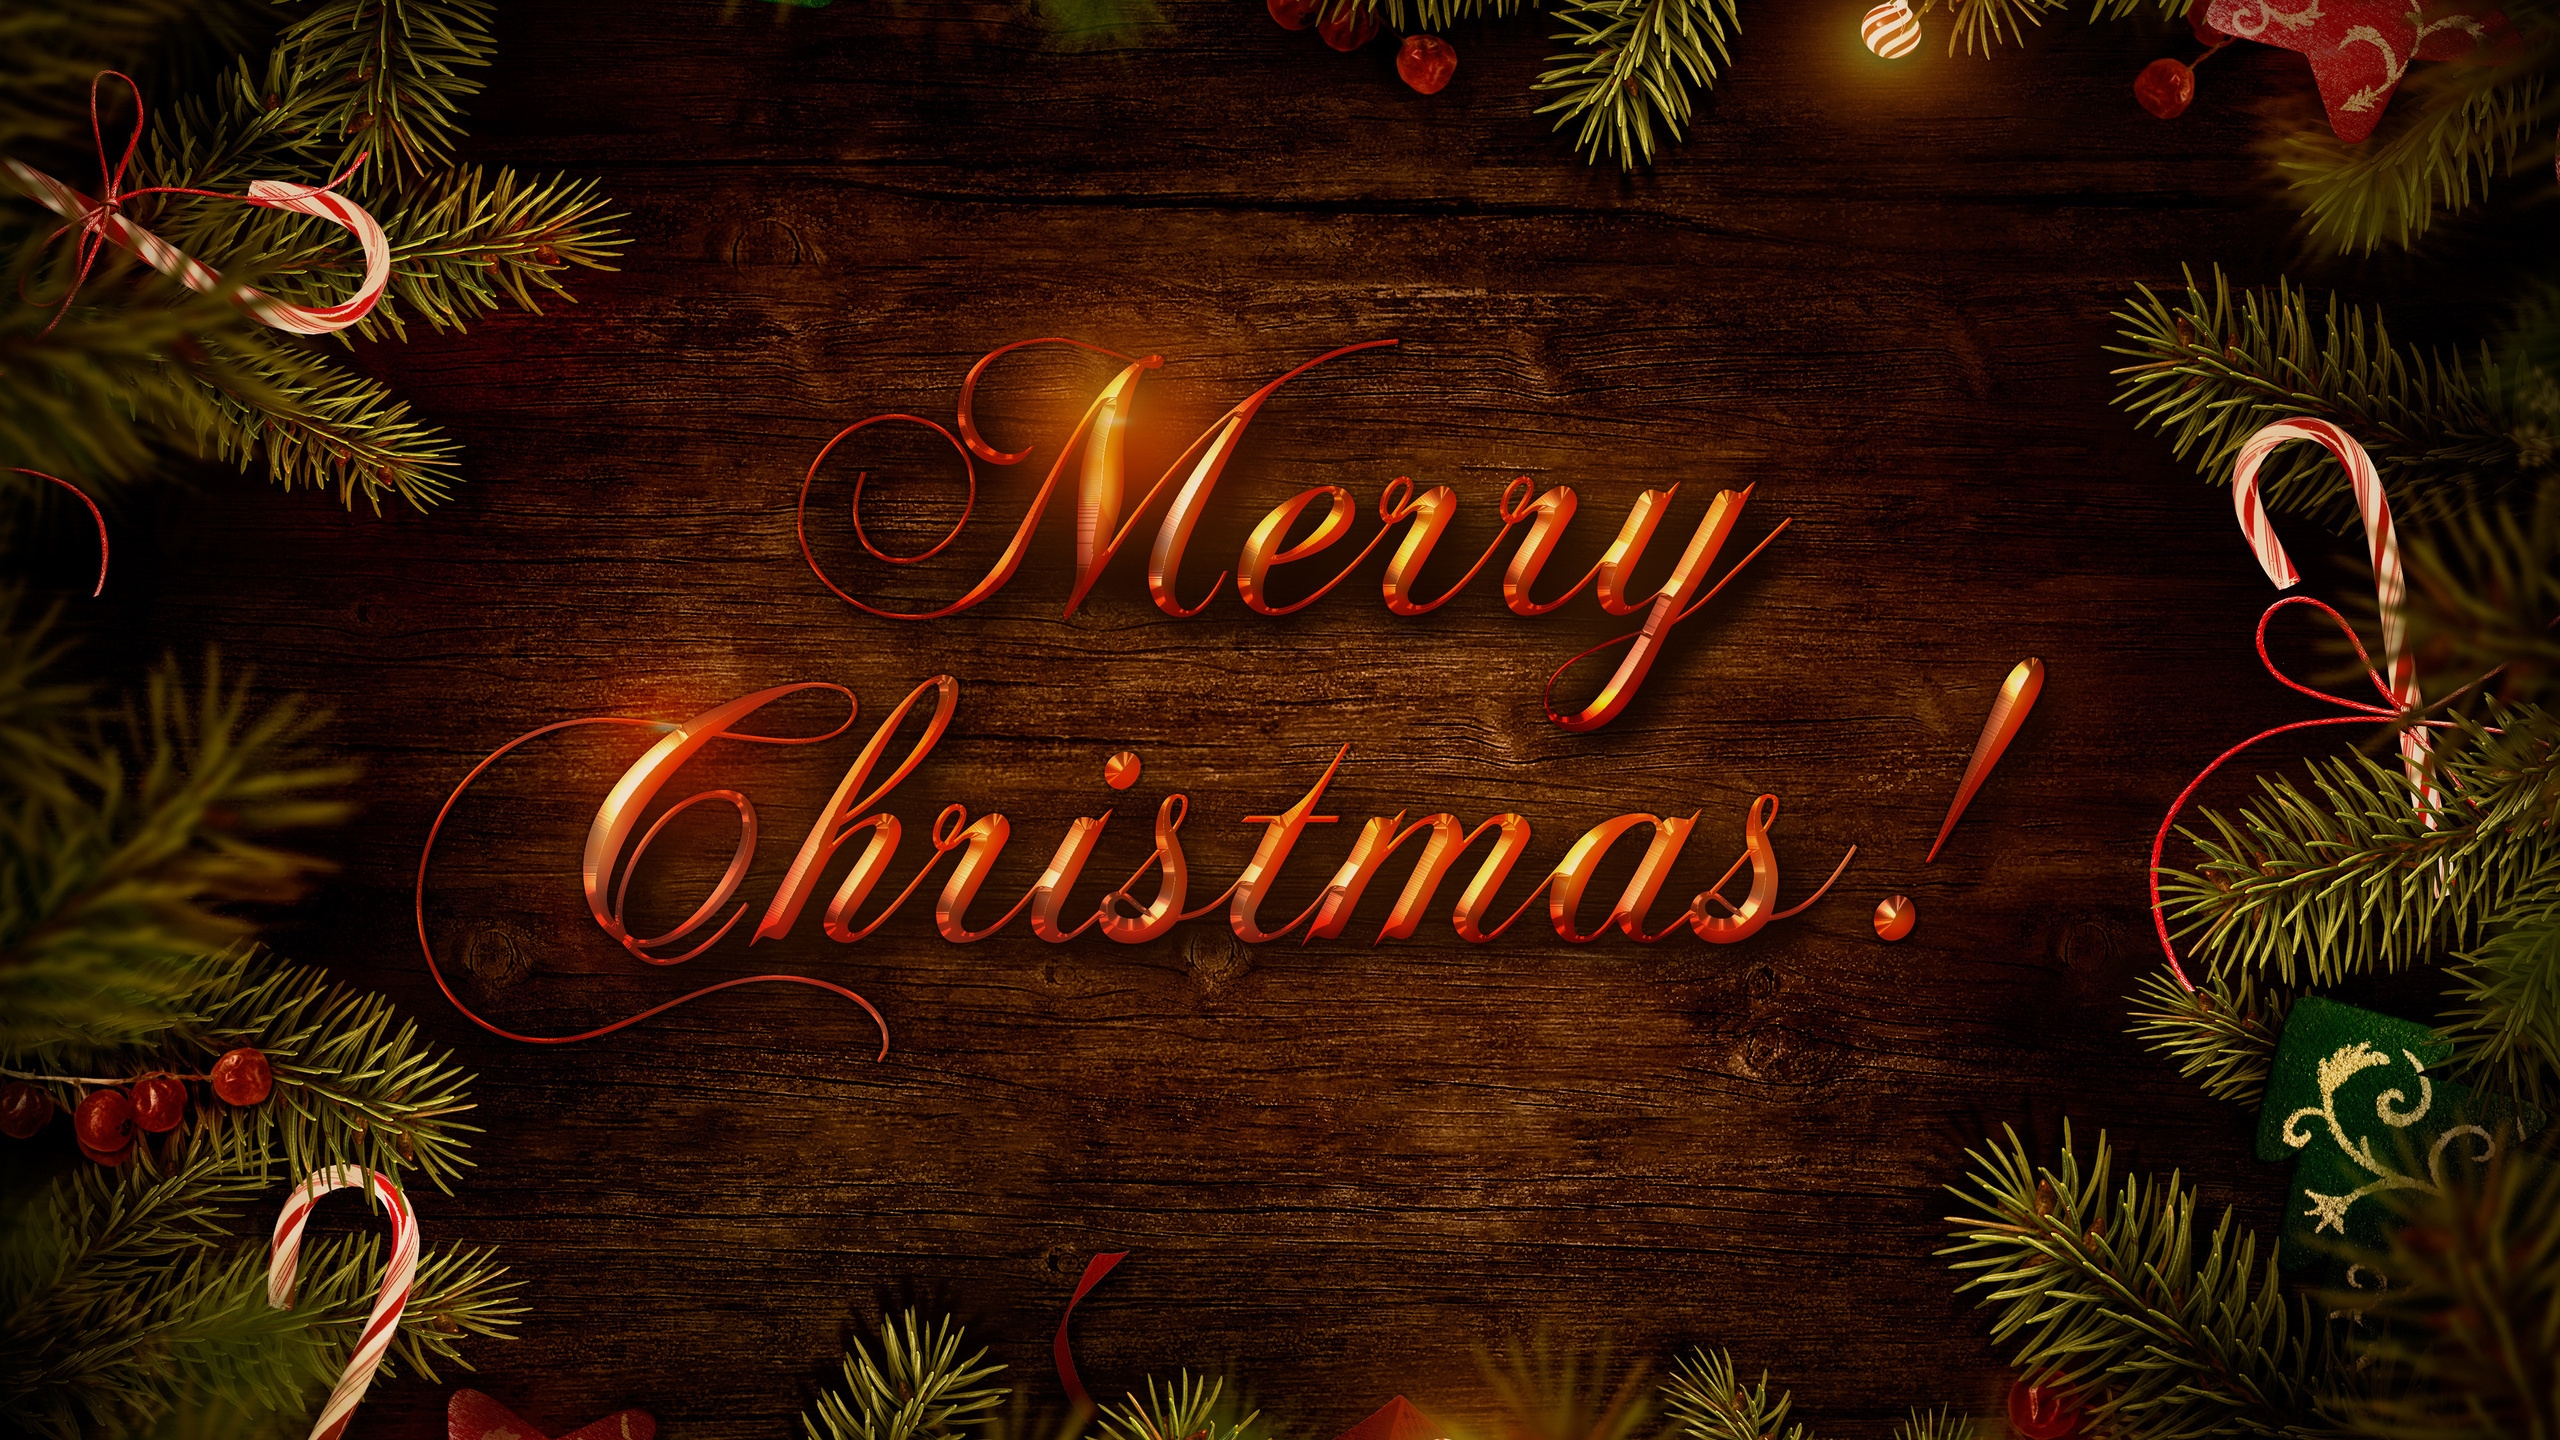 Merry Christmas Wish Decoration for 2560x1440 HDTV resolution